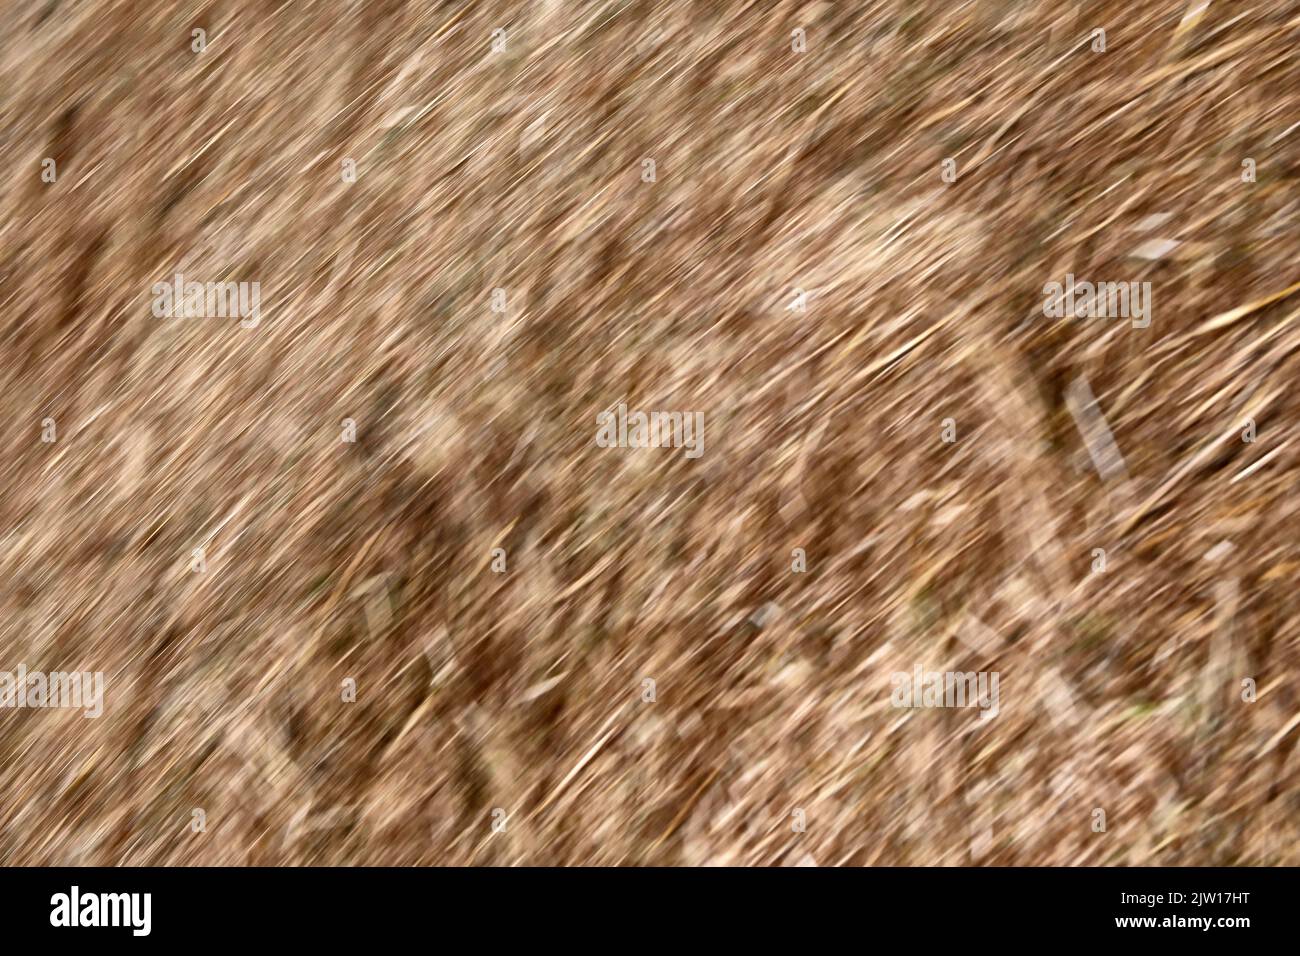 abstract image of straw Stock Photo